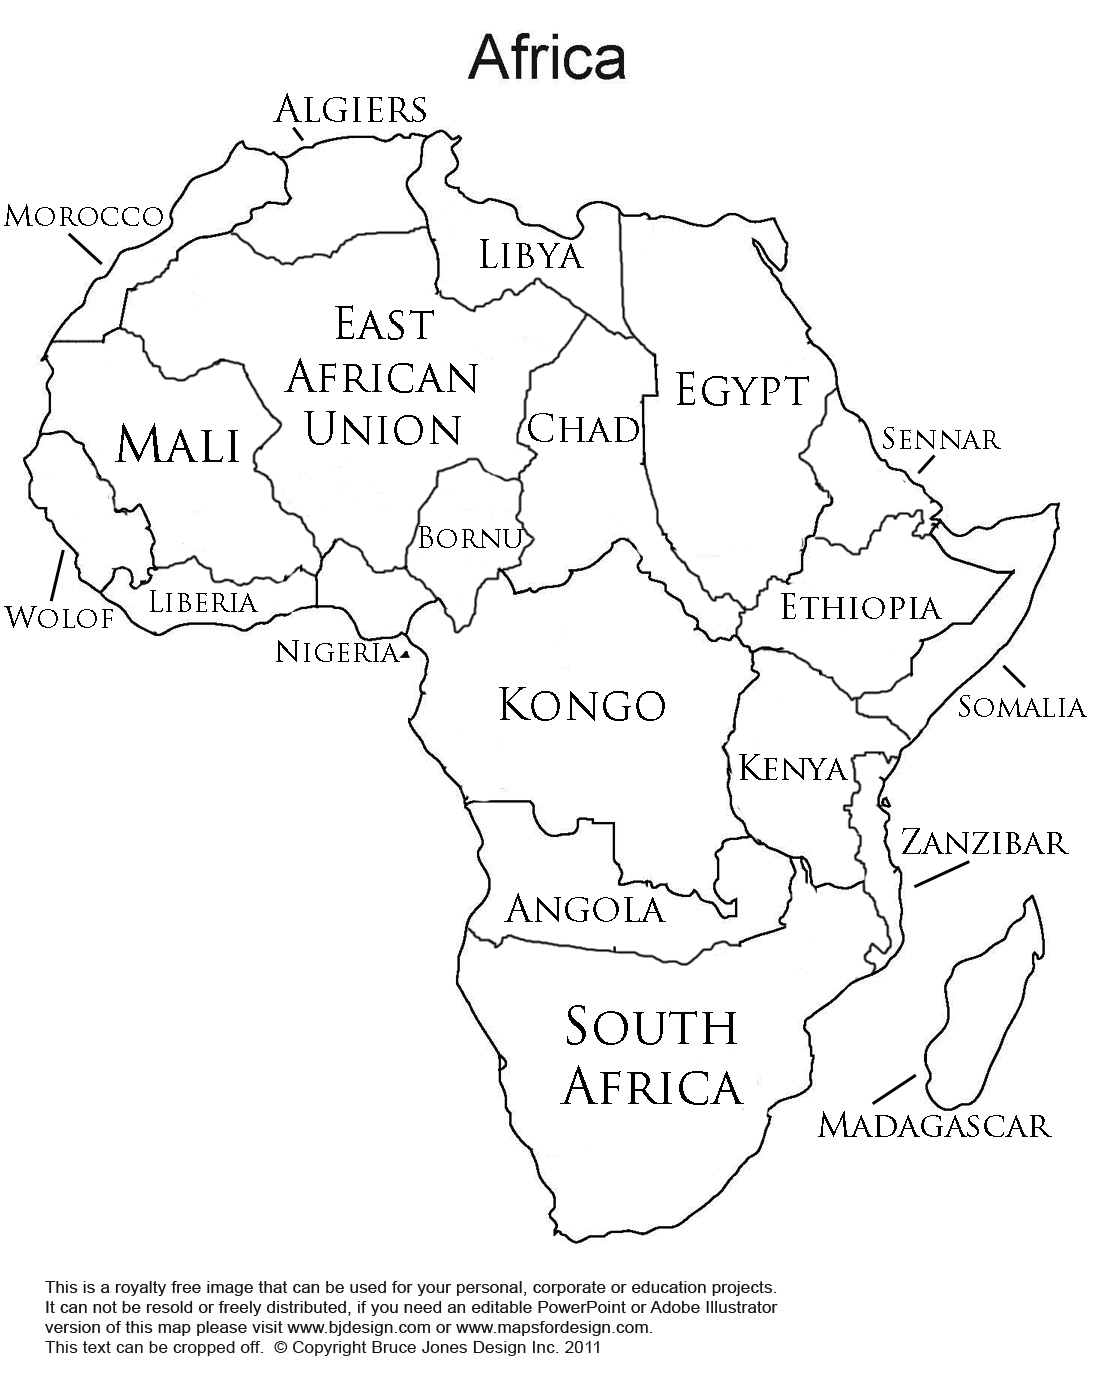 image-africa-with-names-jpg-alternative-history-fandom-powered-by